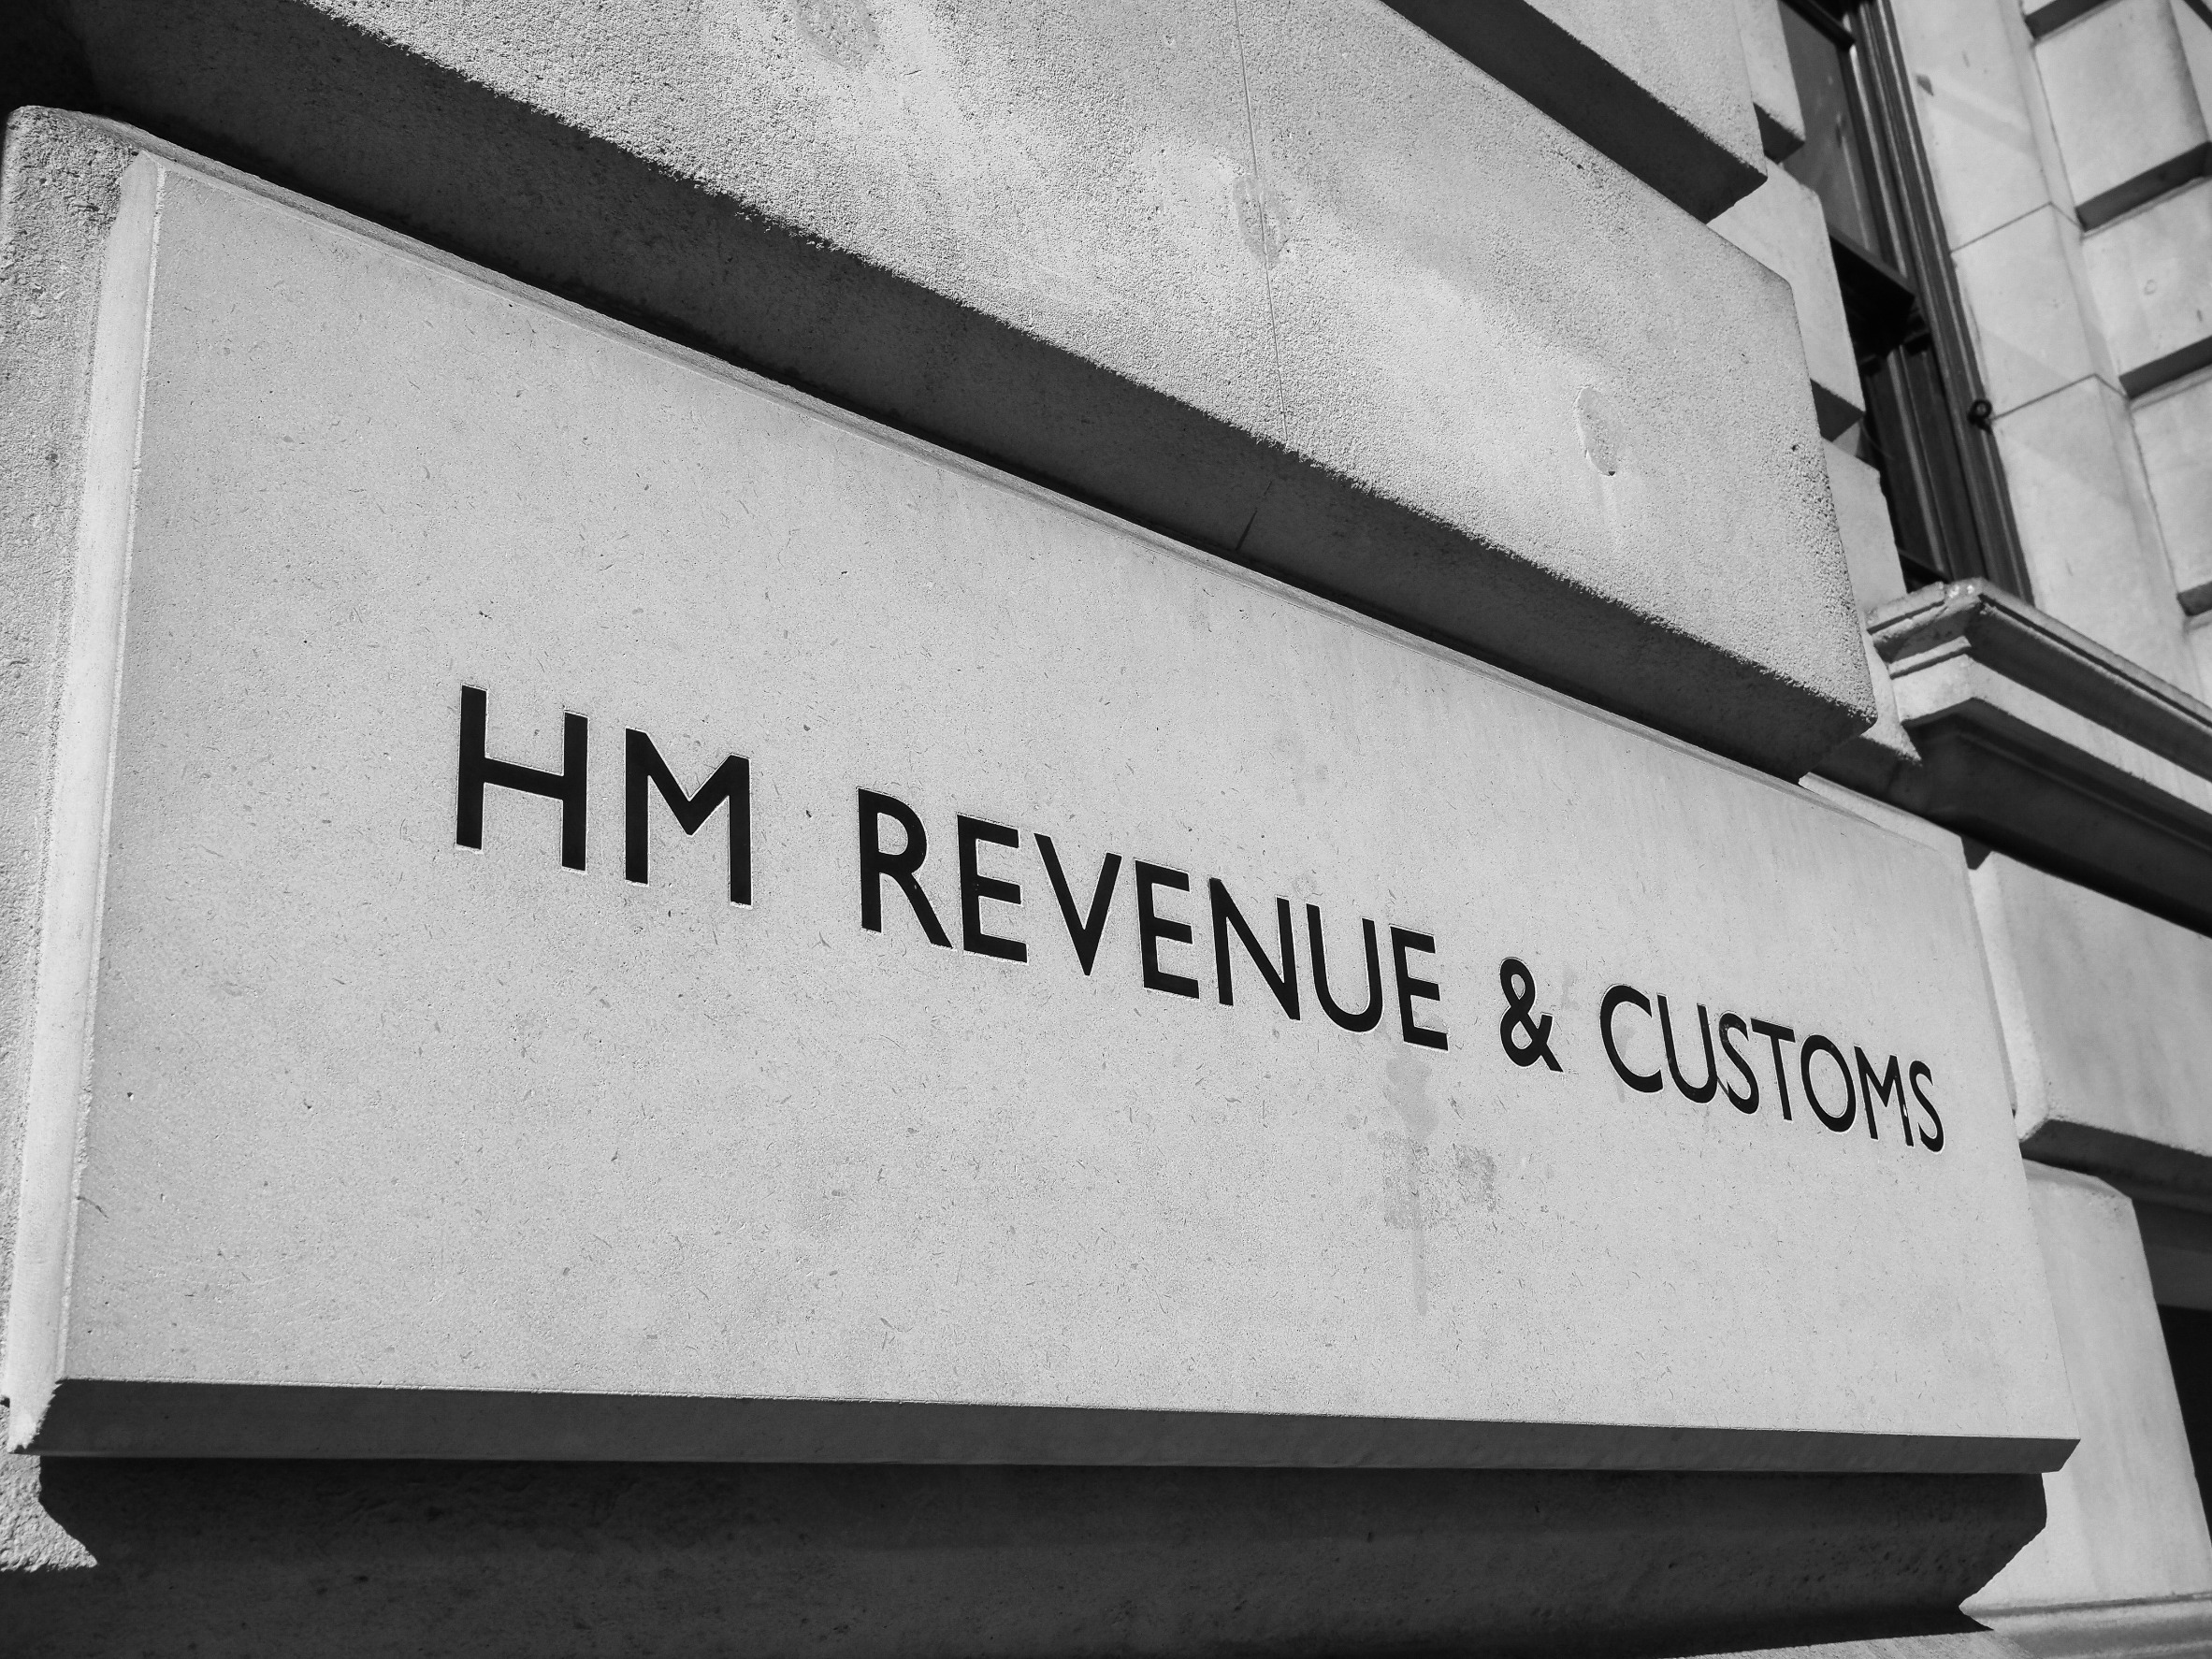 HMRC to Temporarily Close Self Assessment Tax Helpline for Summer: What You Need to Know